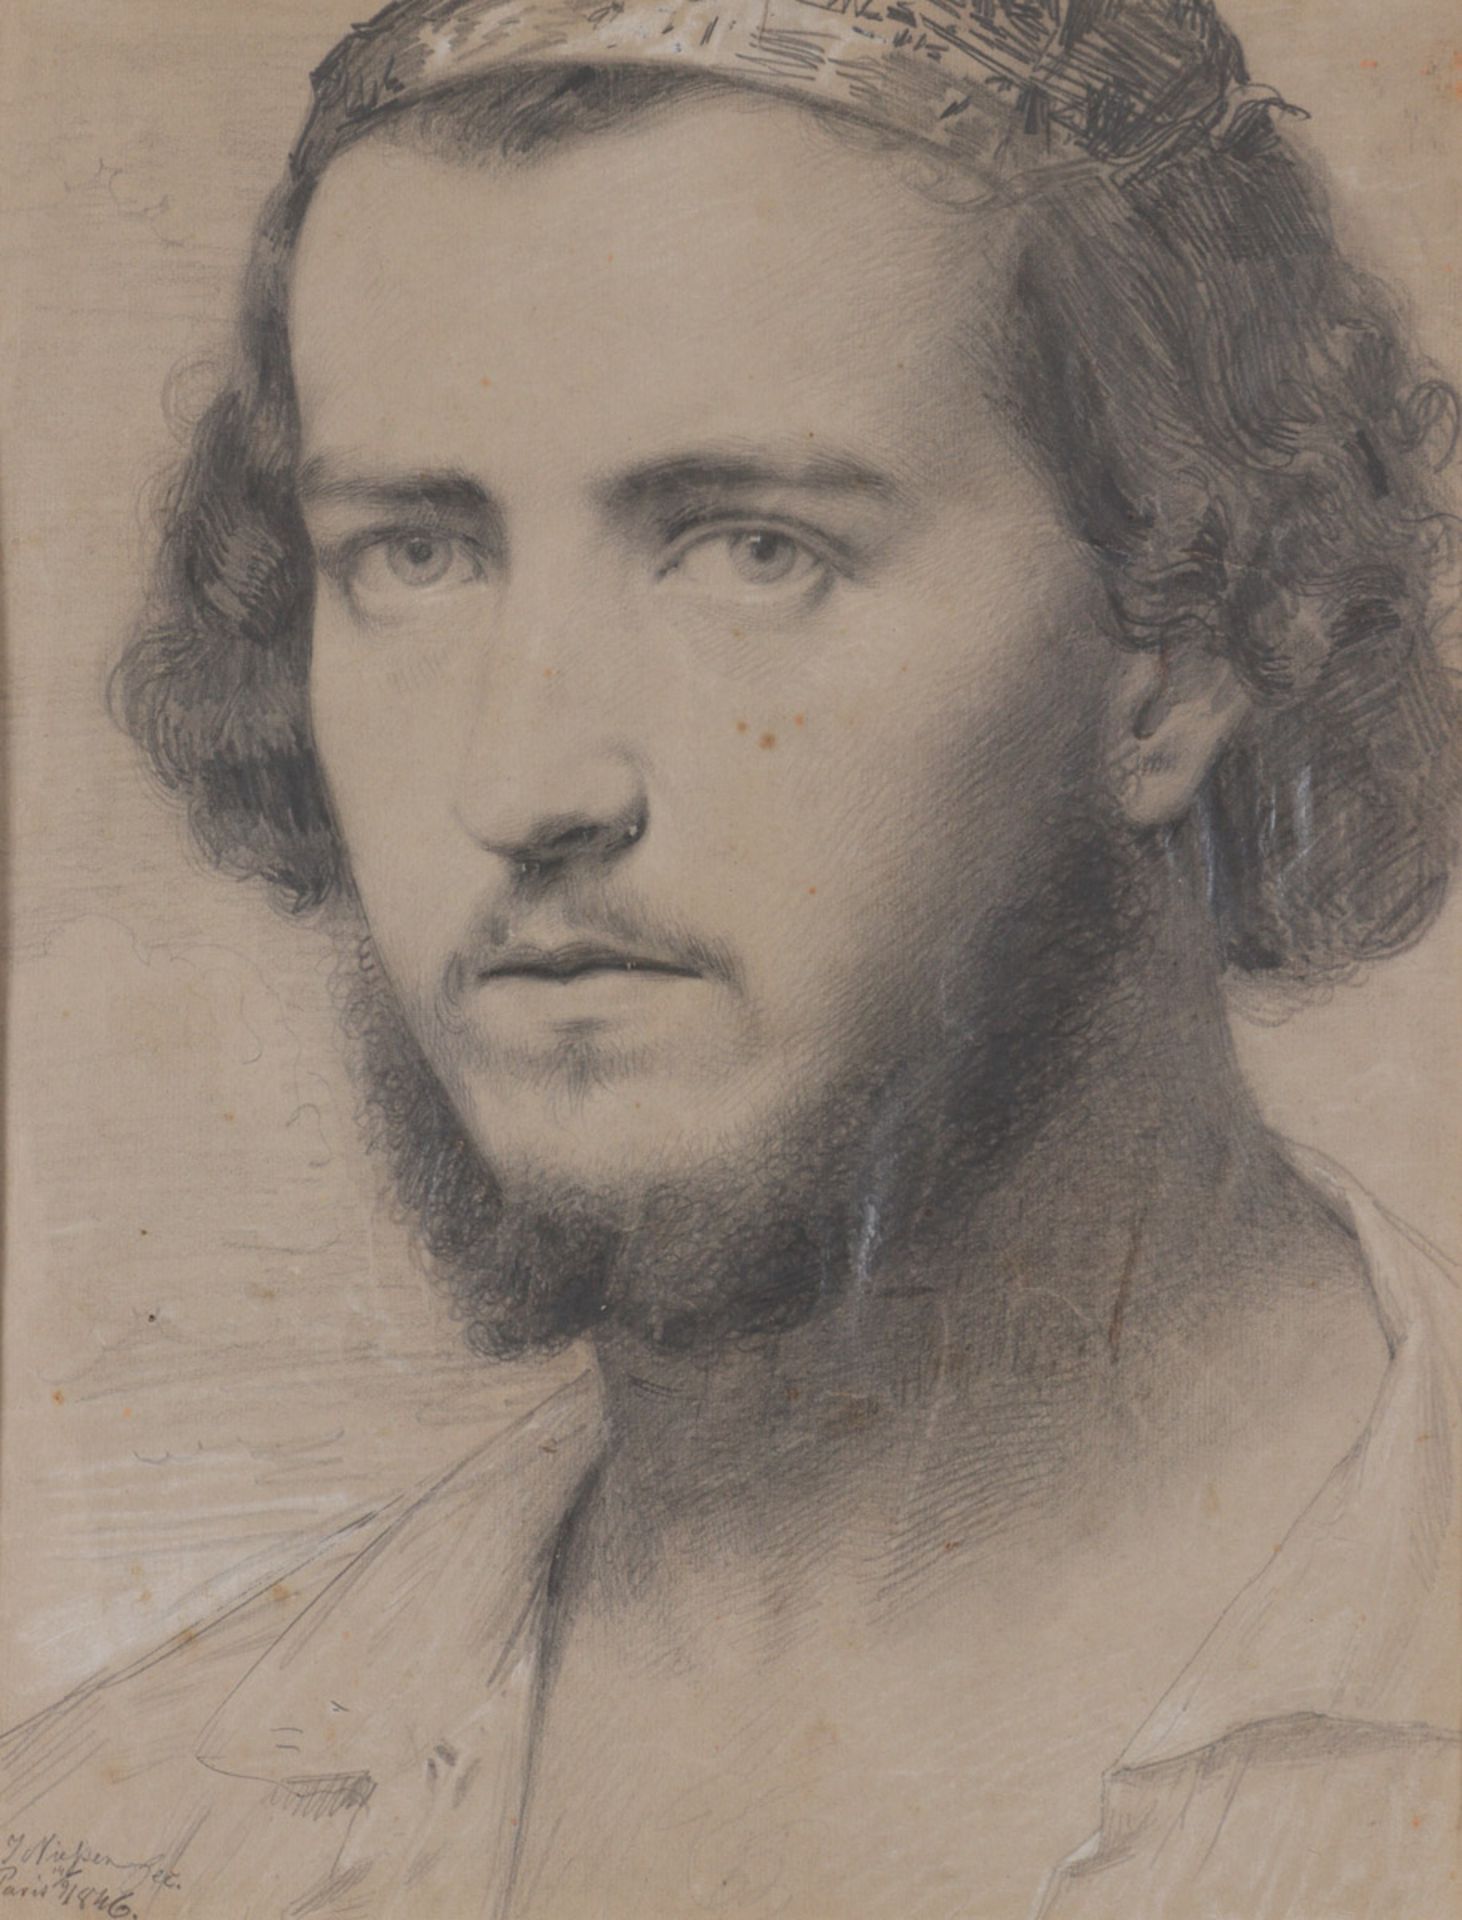 JOHANNES NIESSEN (1821-1910), STUDY OF A MALE FIGURE Pencil on paper. Signed and dated Paris,